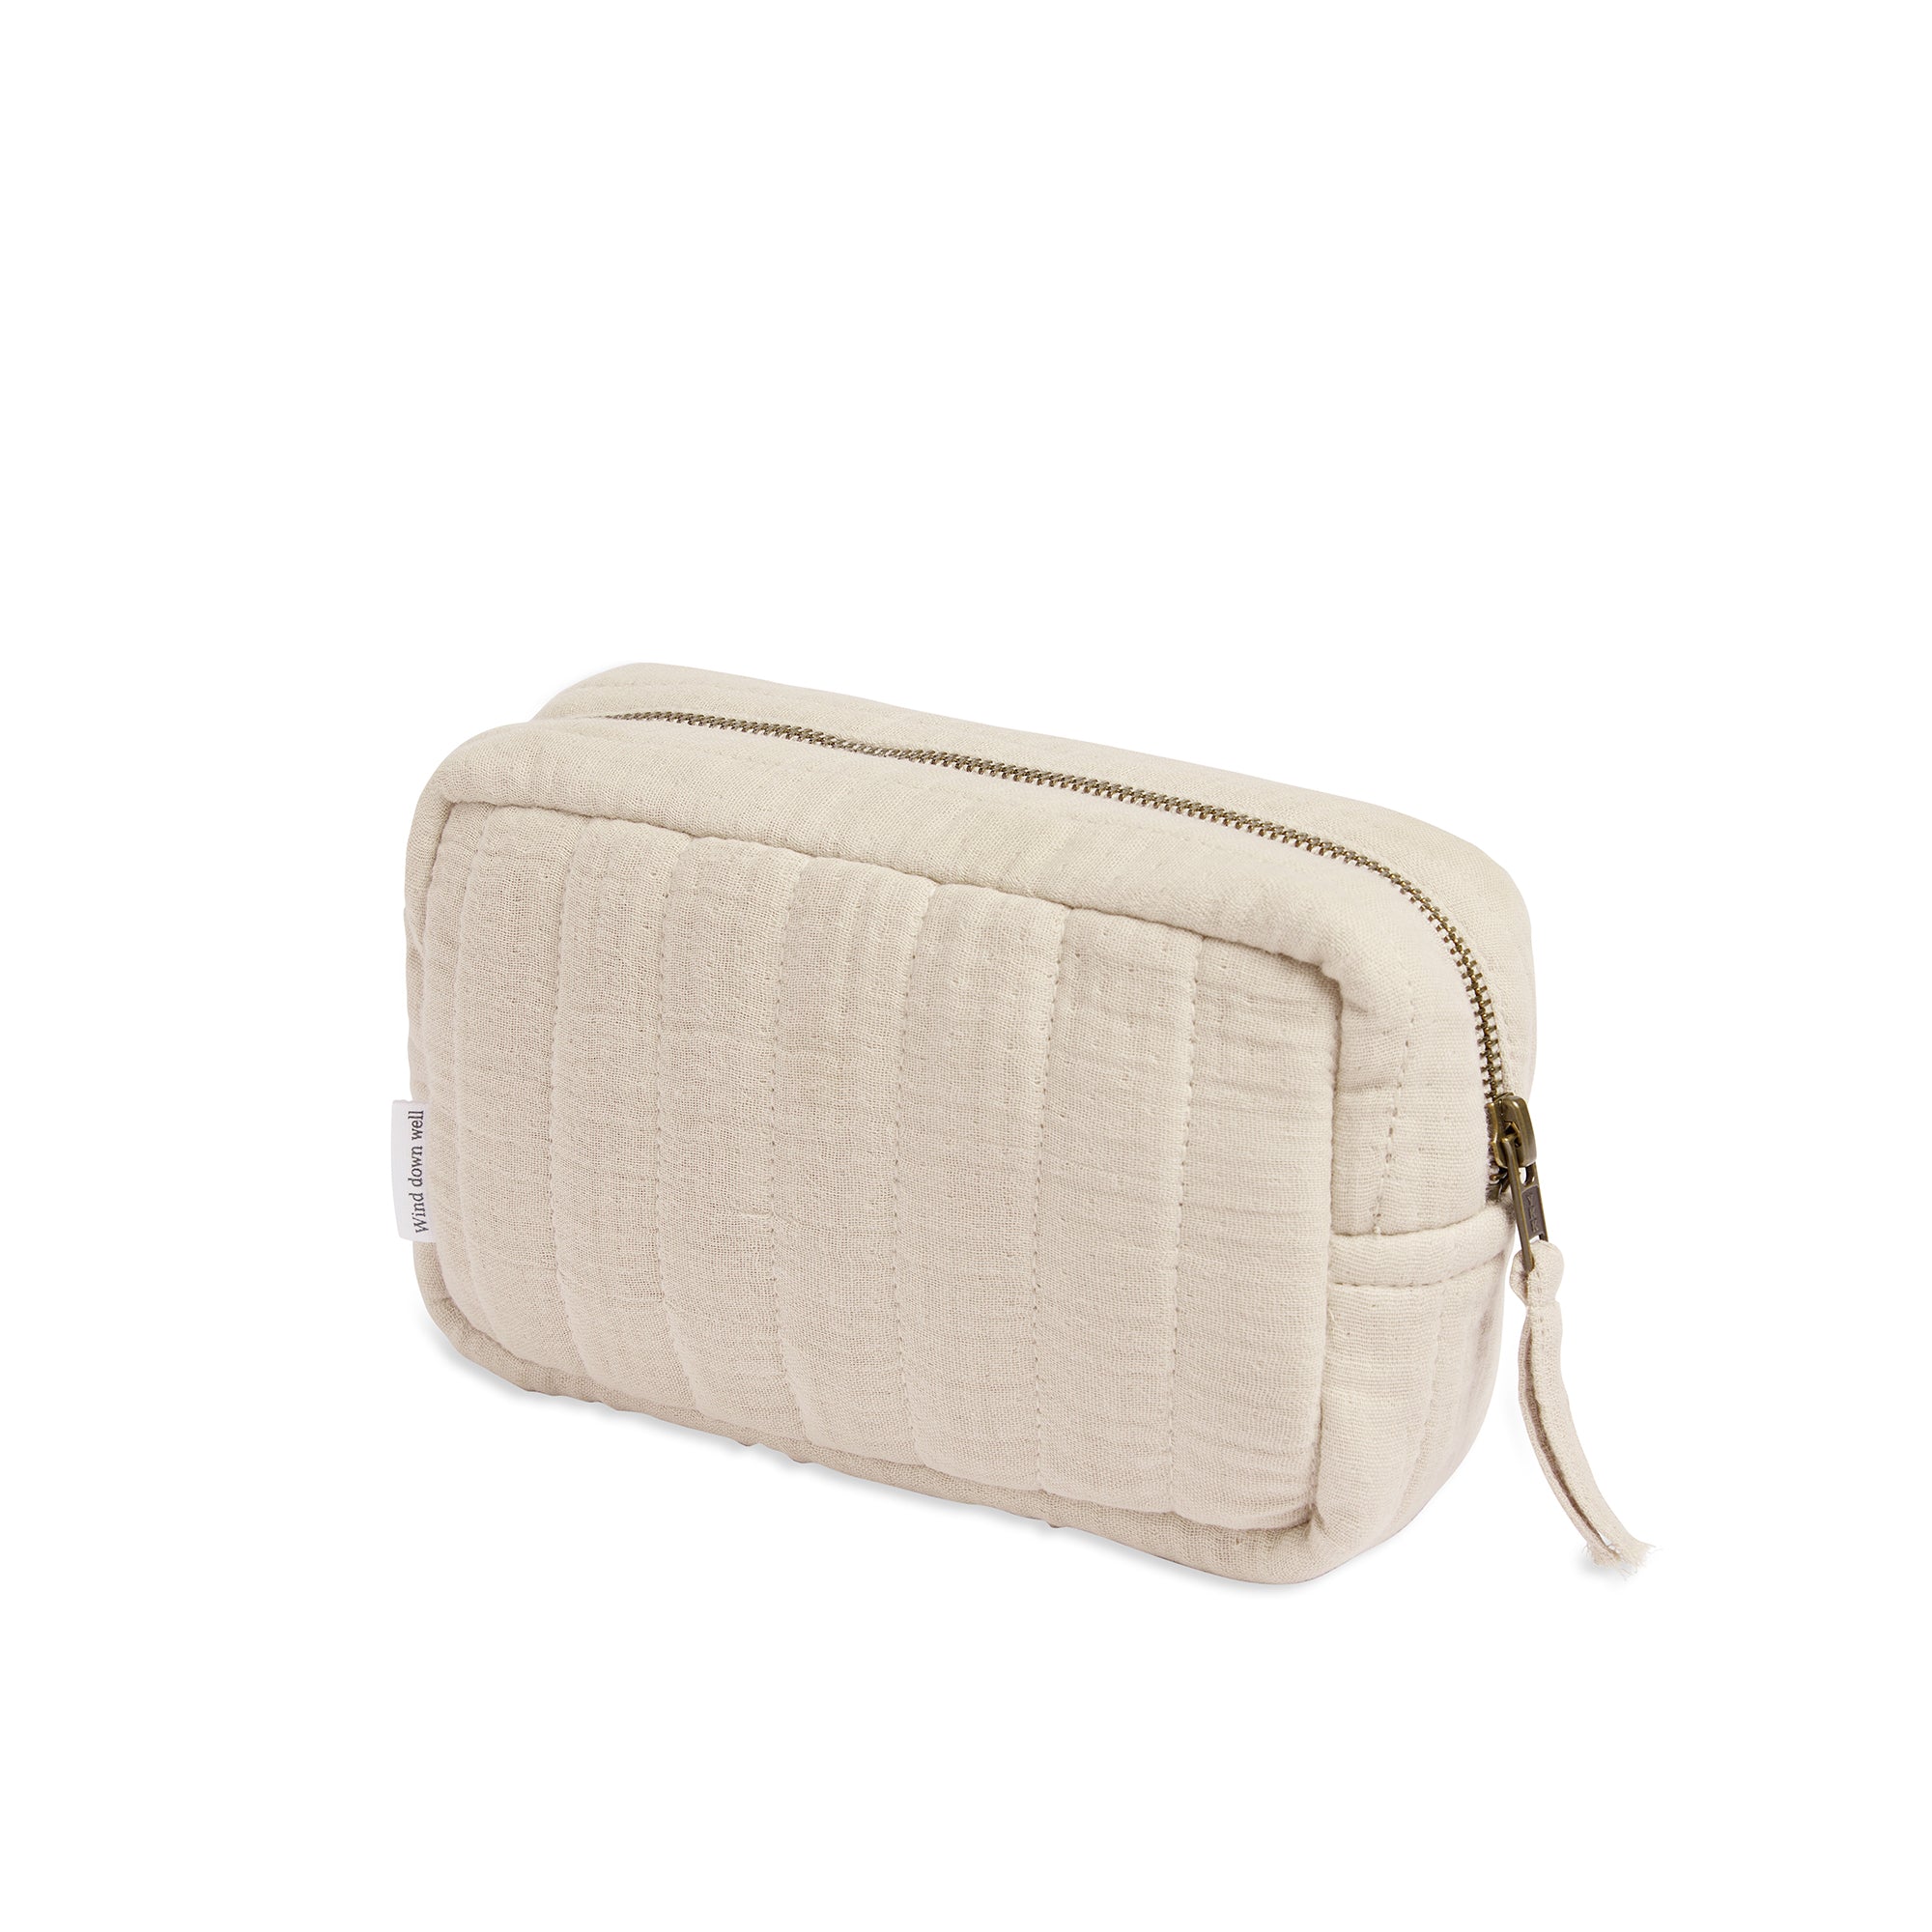 The Dream Cotton Make-Up Bag - Fawn